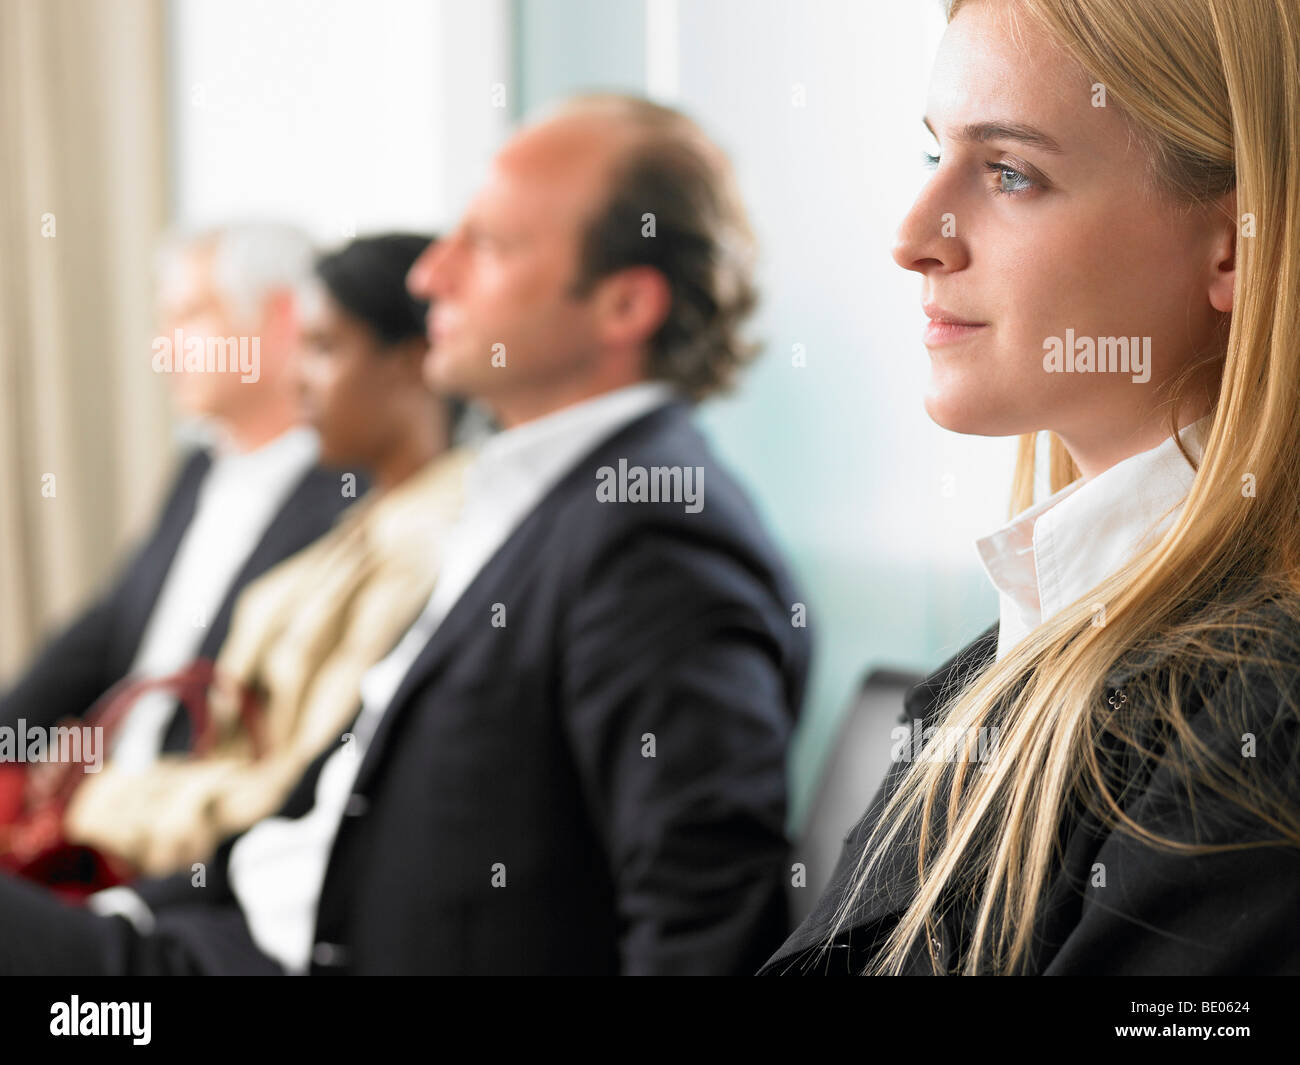 People sitting in a waiting room Stock Photo